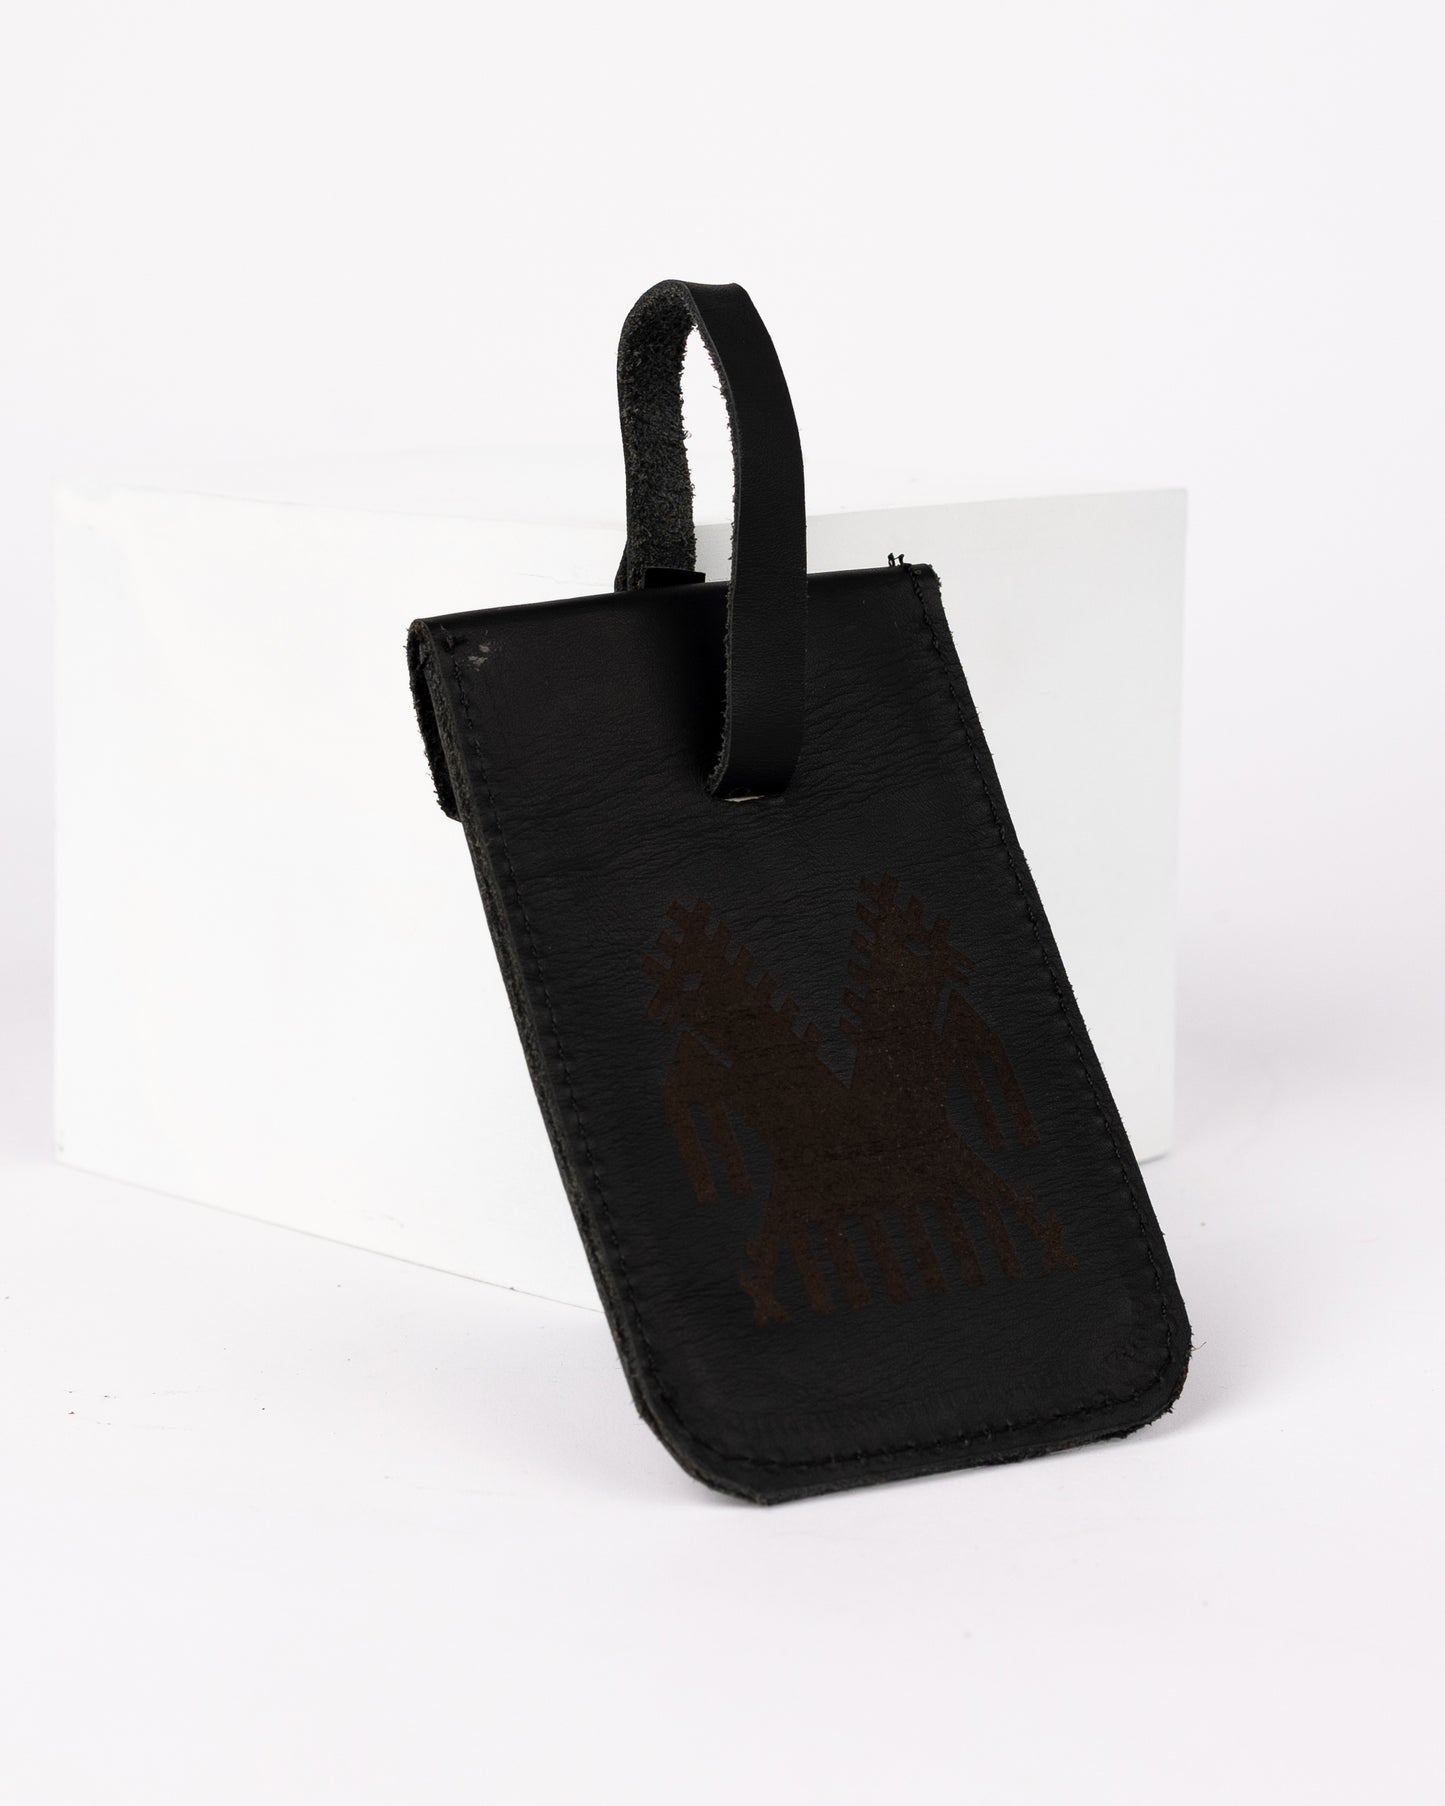 The Panza Verde Leather Luggage Tag